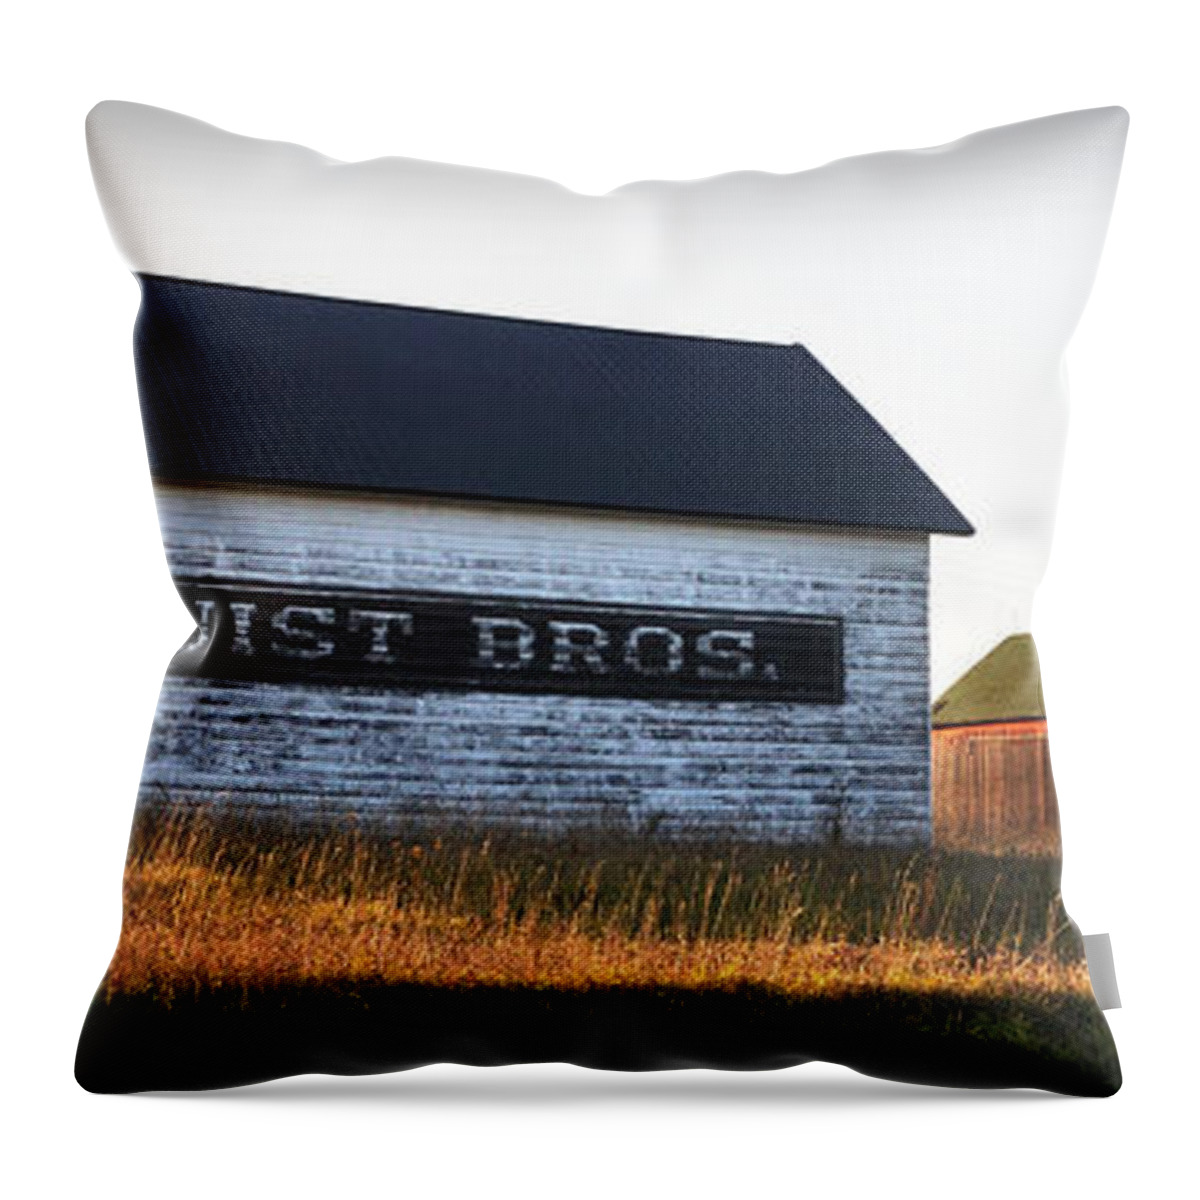 Fall Throw Pillow featuring the photograph Logerquist Bros. by Tim Nyberg